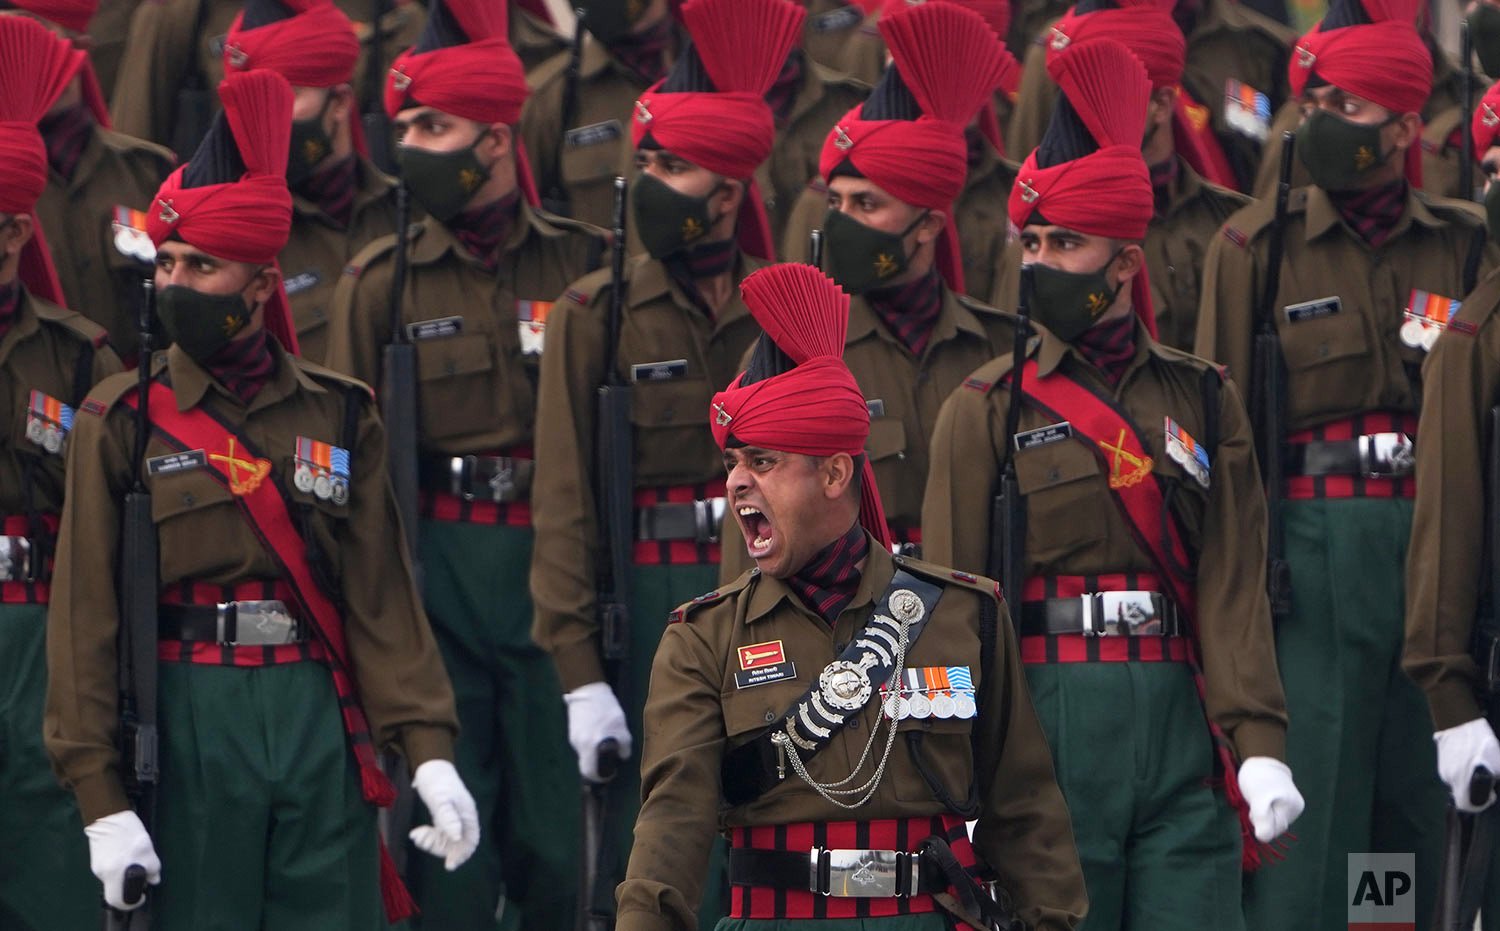  Indian army soldiers march through the ceremonial Rajpath boulevard during India's Republic Day celebrations, in New Delhi, India, Wednesday, Jan. 26, 2022.  (AP Photo/Manish Swarup) 